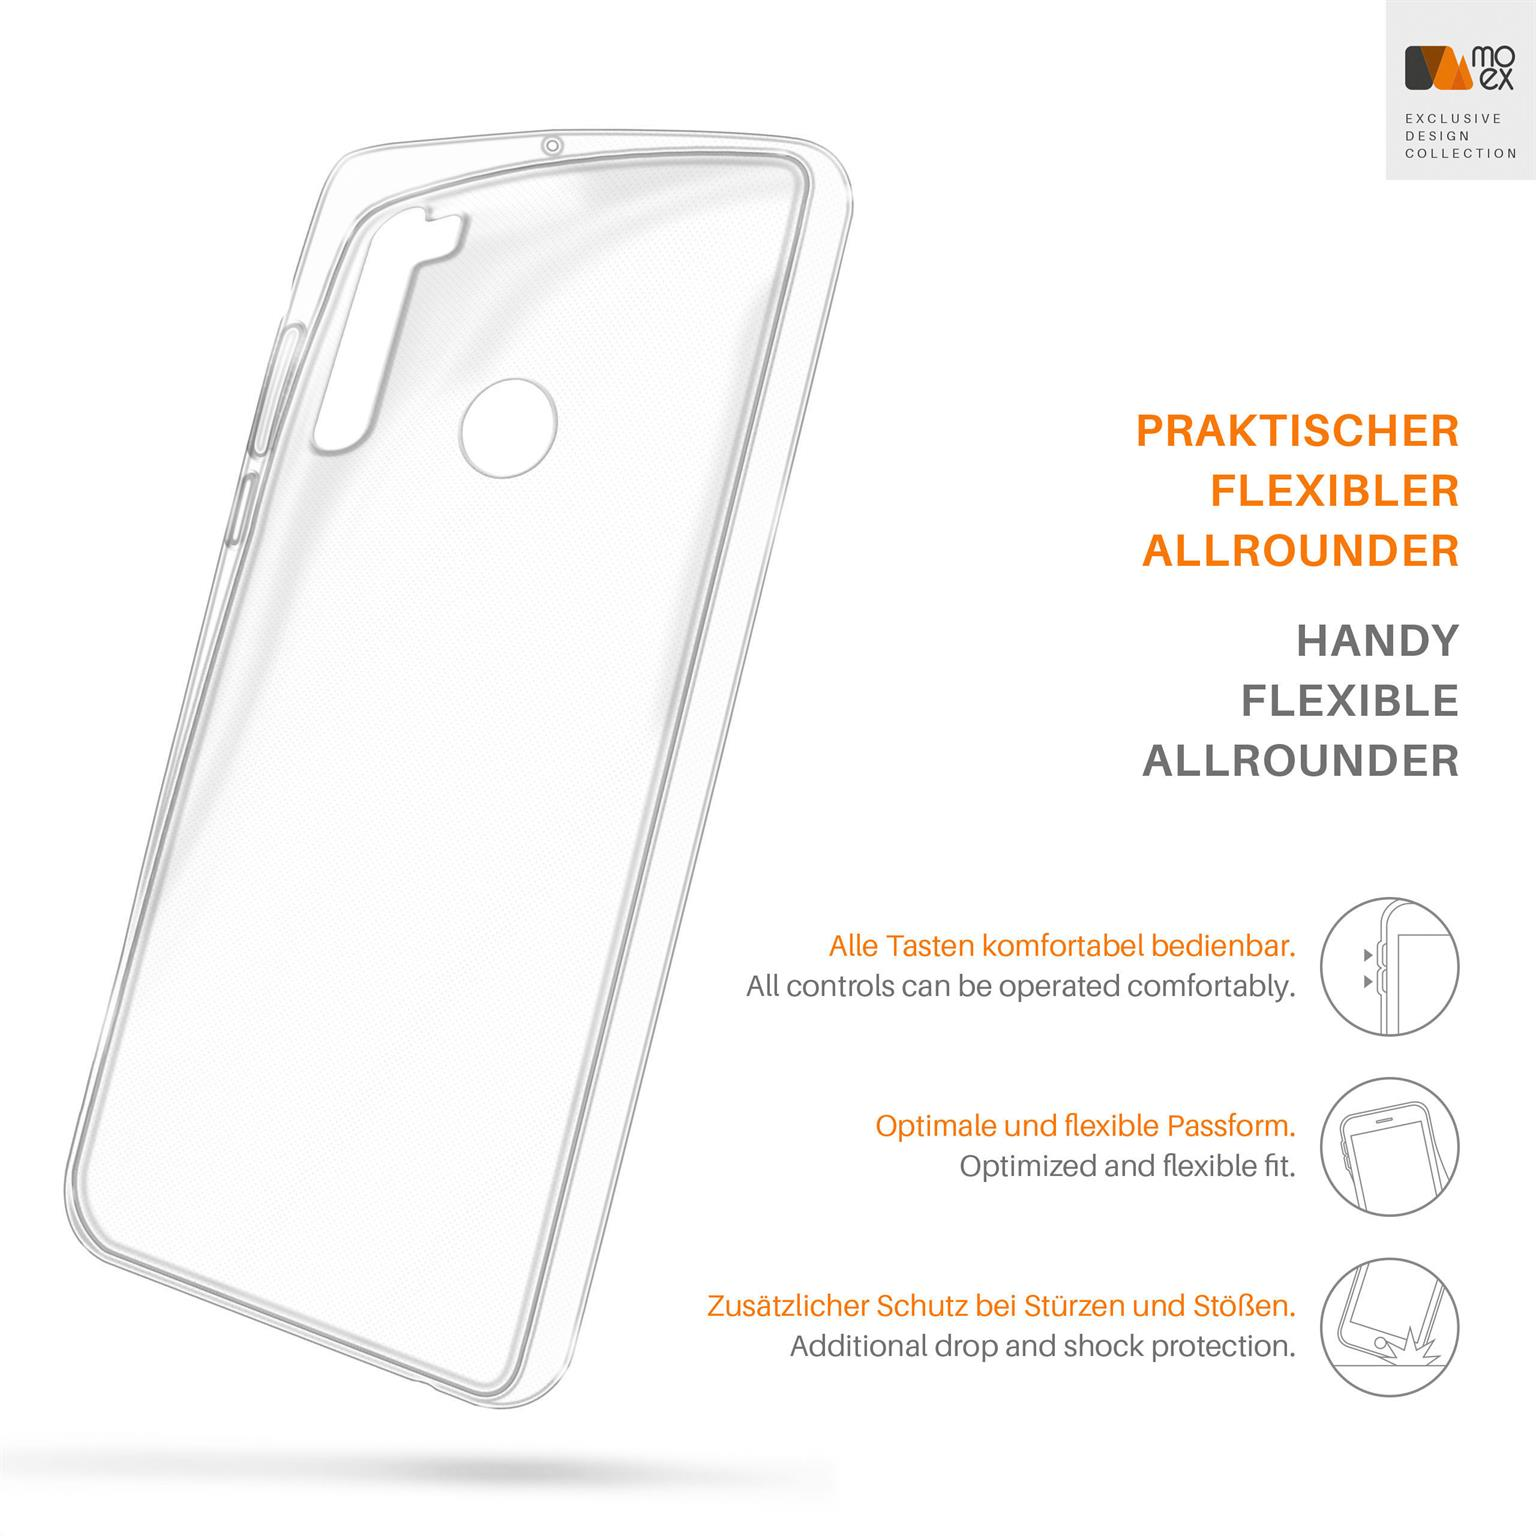 Backcover, Xiaomi, 8, Case, Aero Redmi Note MOEX Crystal-Clear